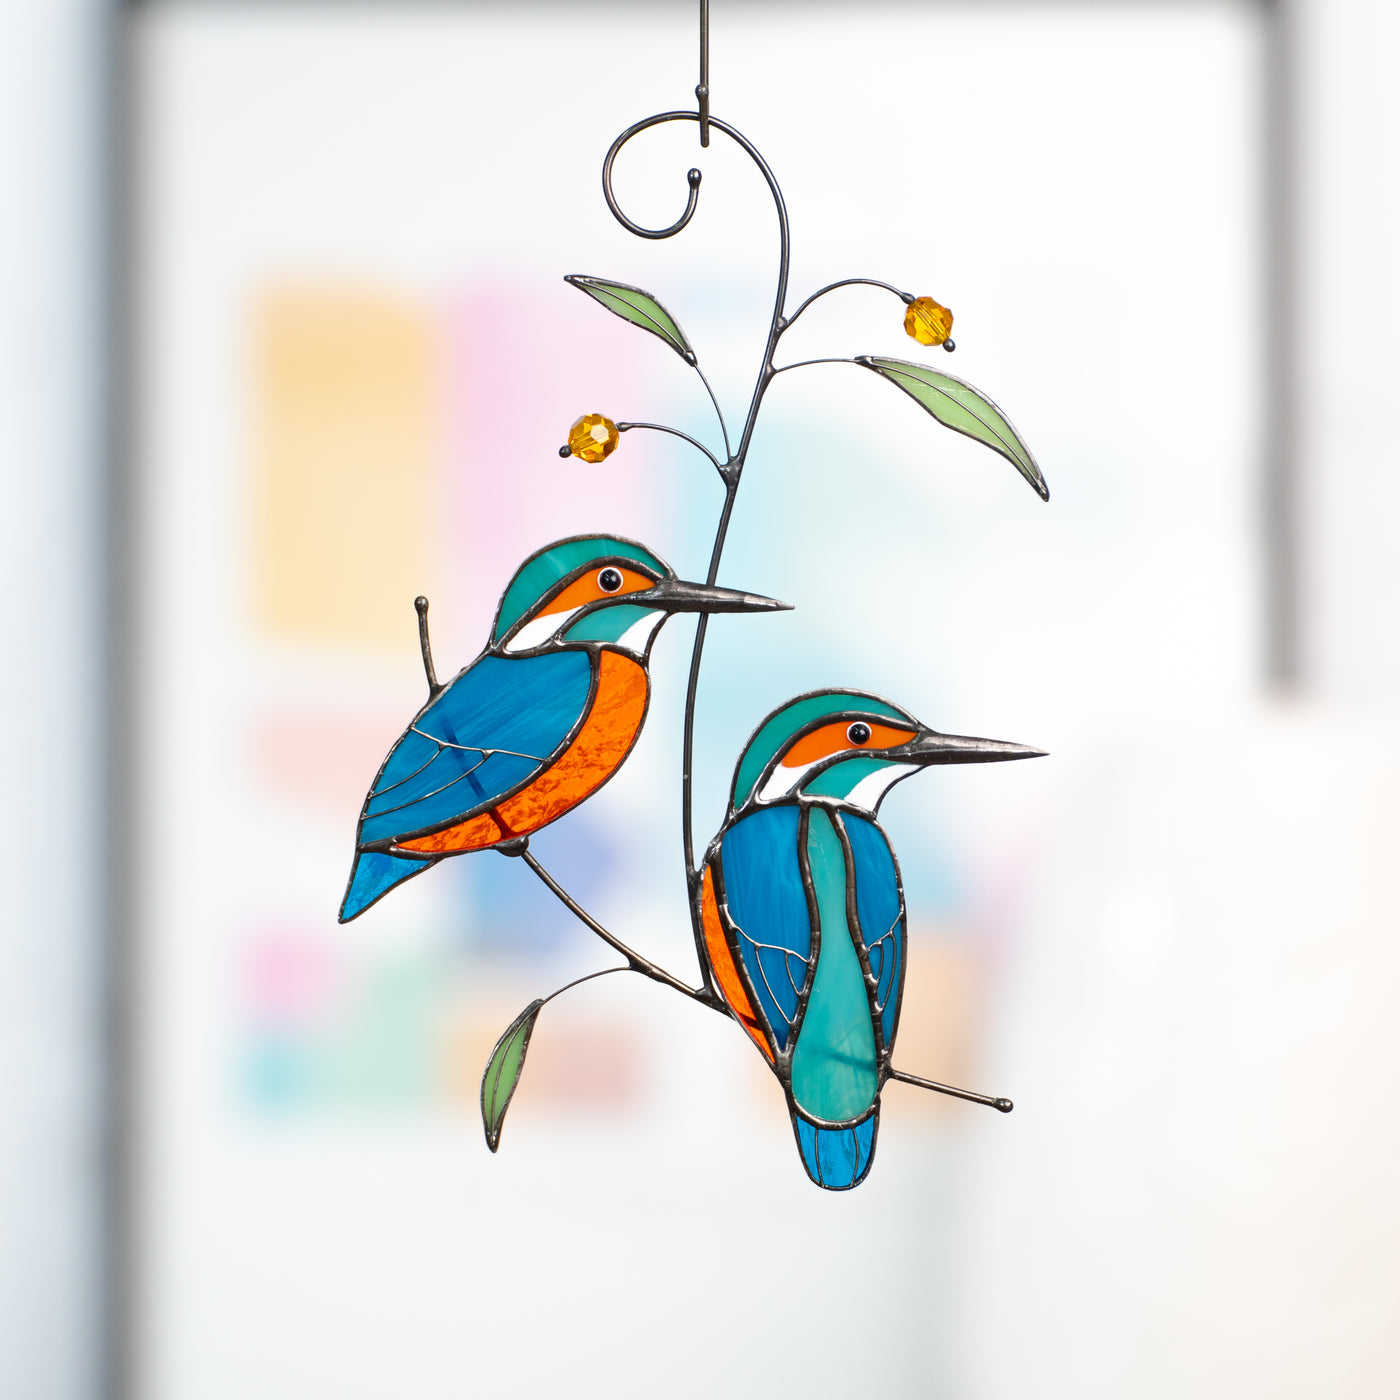 Stained glass suncatcher of two kingfishers sitting on the branch with leaves and berries 